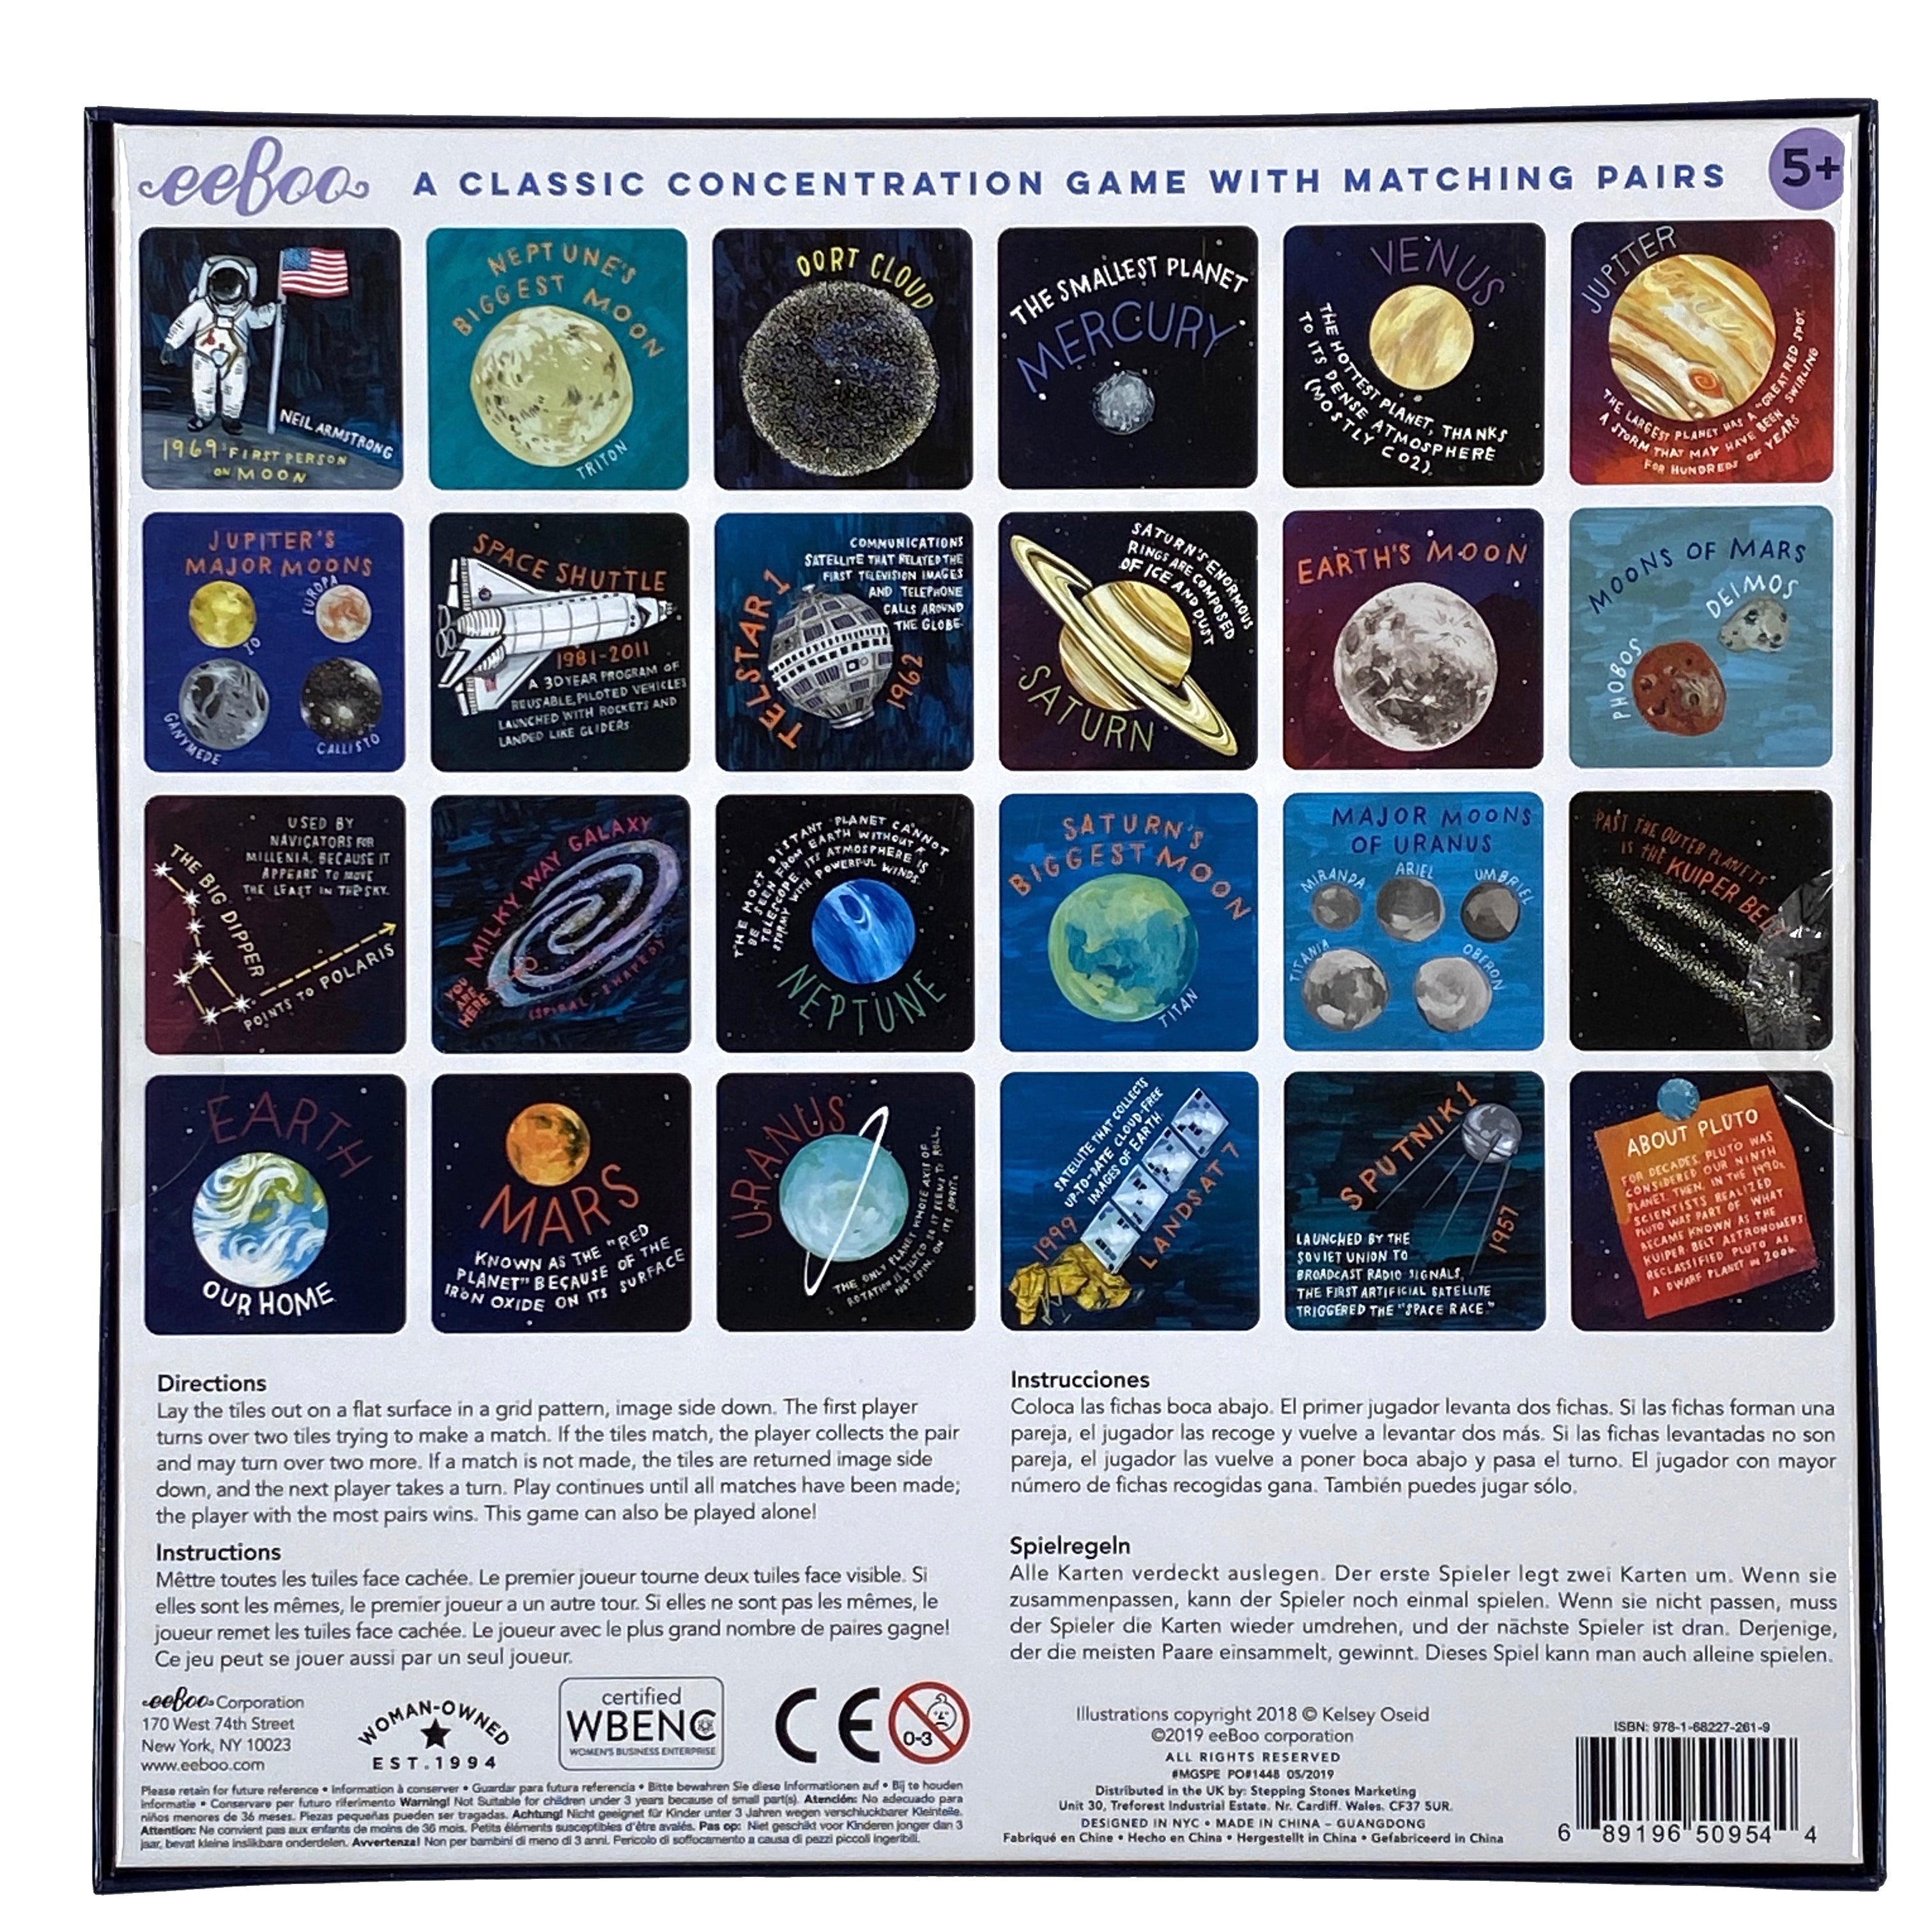 Space Exploration Memory And Matching Game    